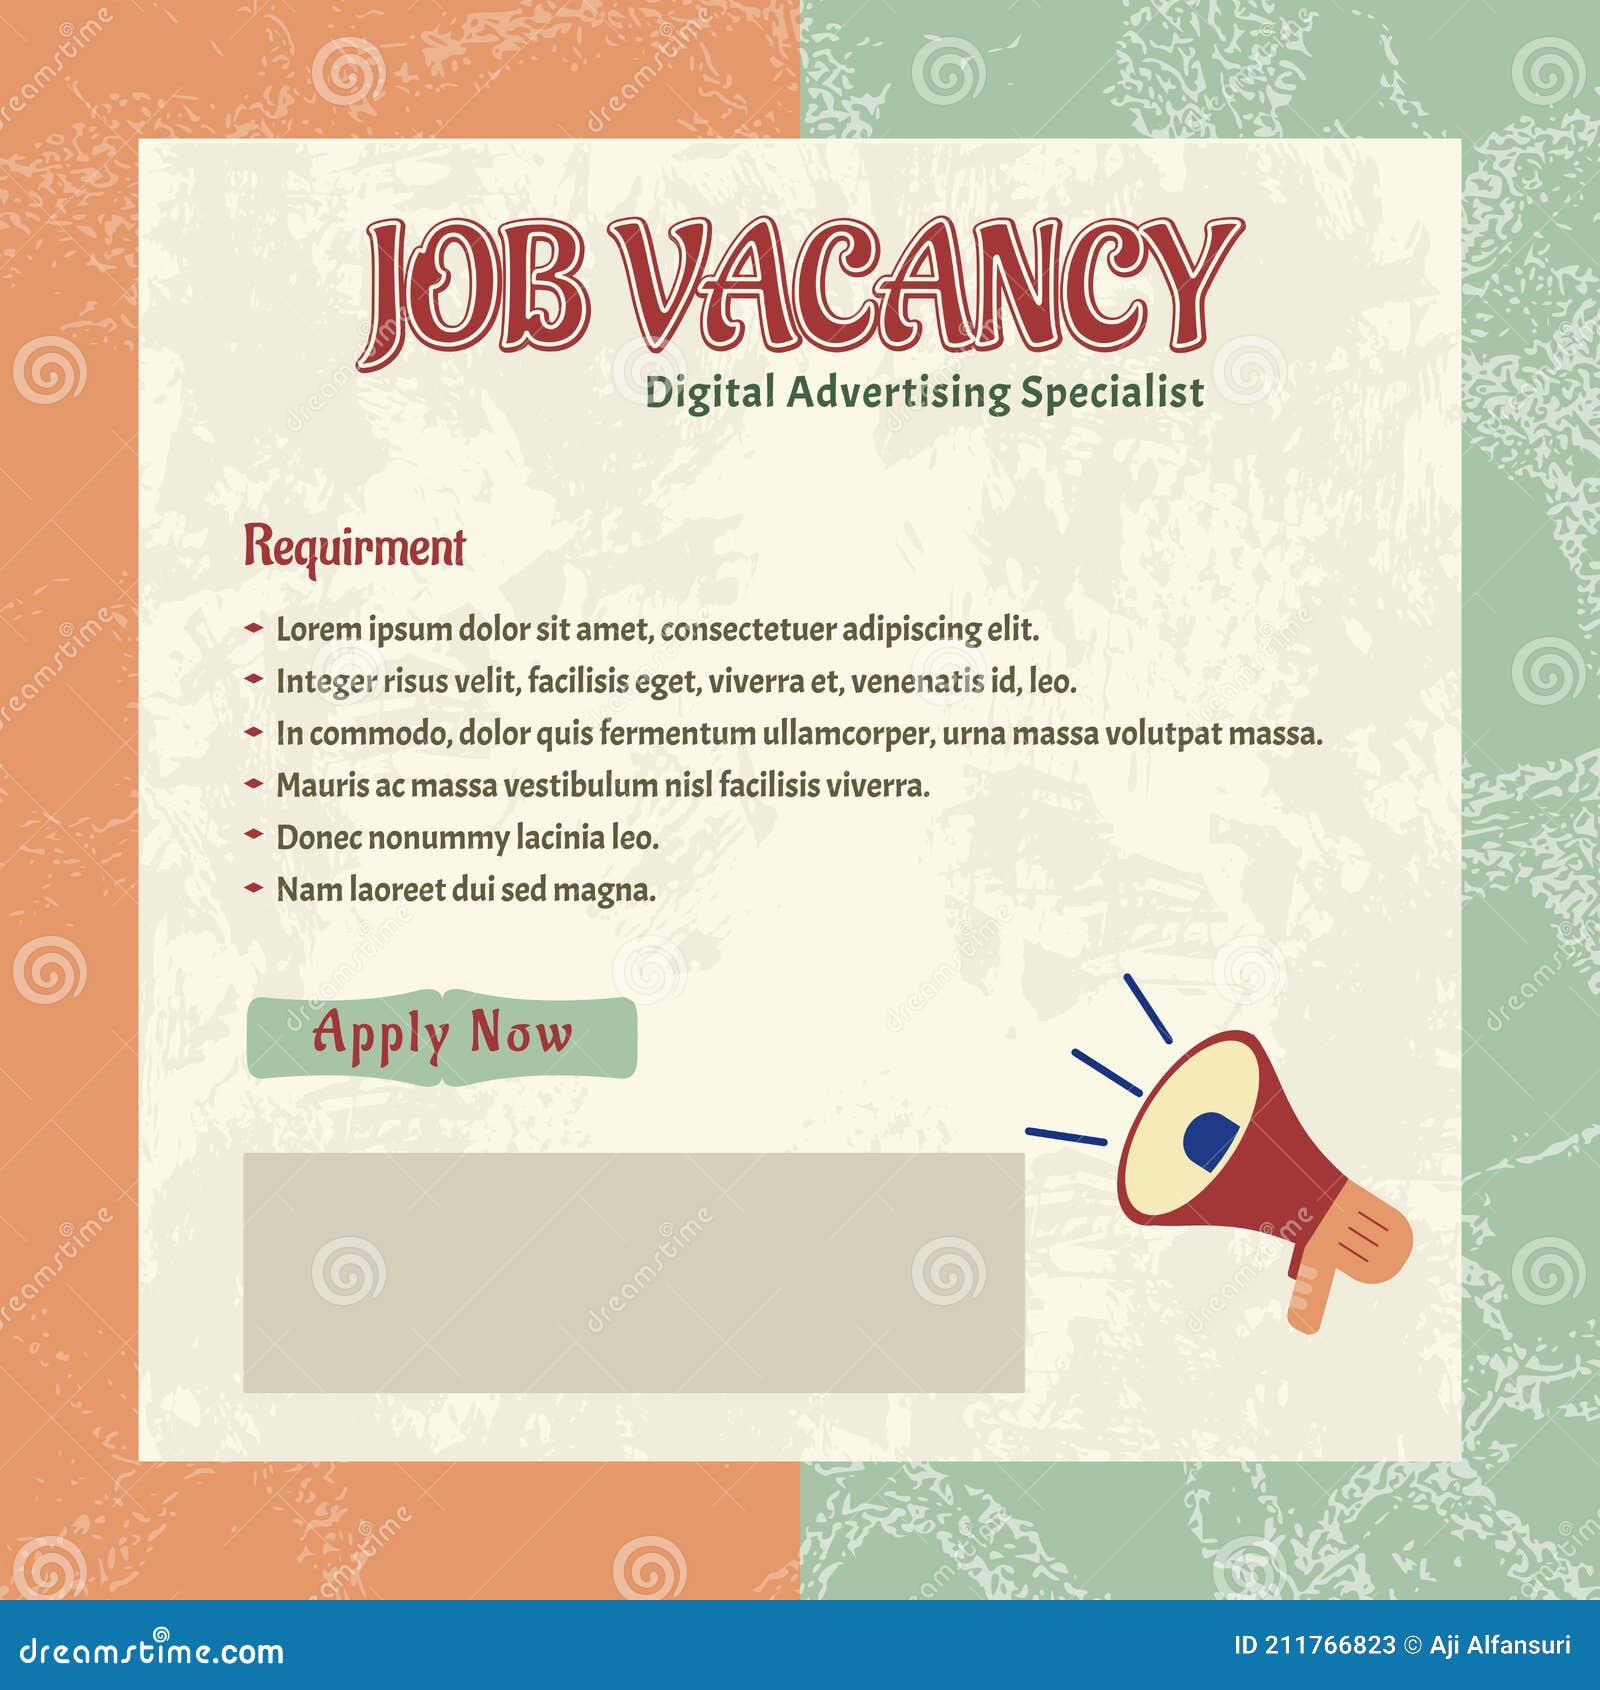 Excluir niebla tóxica soporte Job Vacancy Templates. we are Hire Jobs that are Used on Social Media  Content Stock Vector - Illustration of agency, opportunity: 211766823